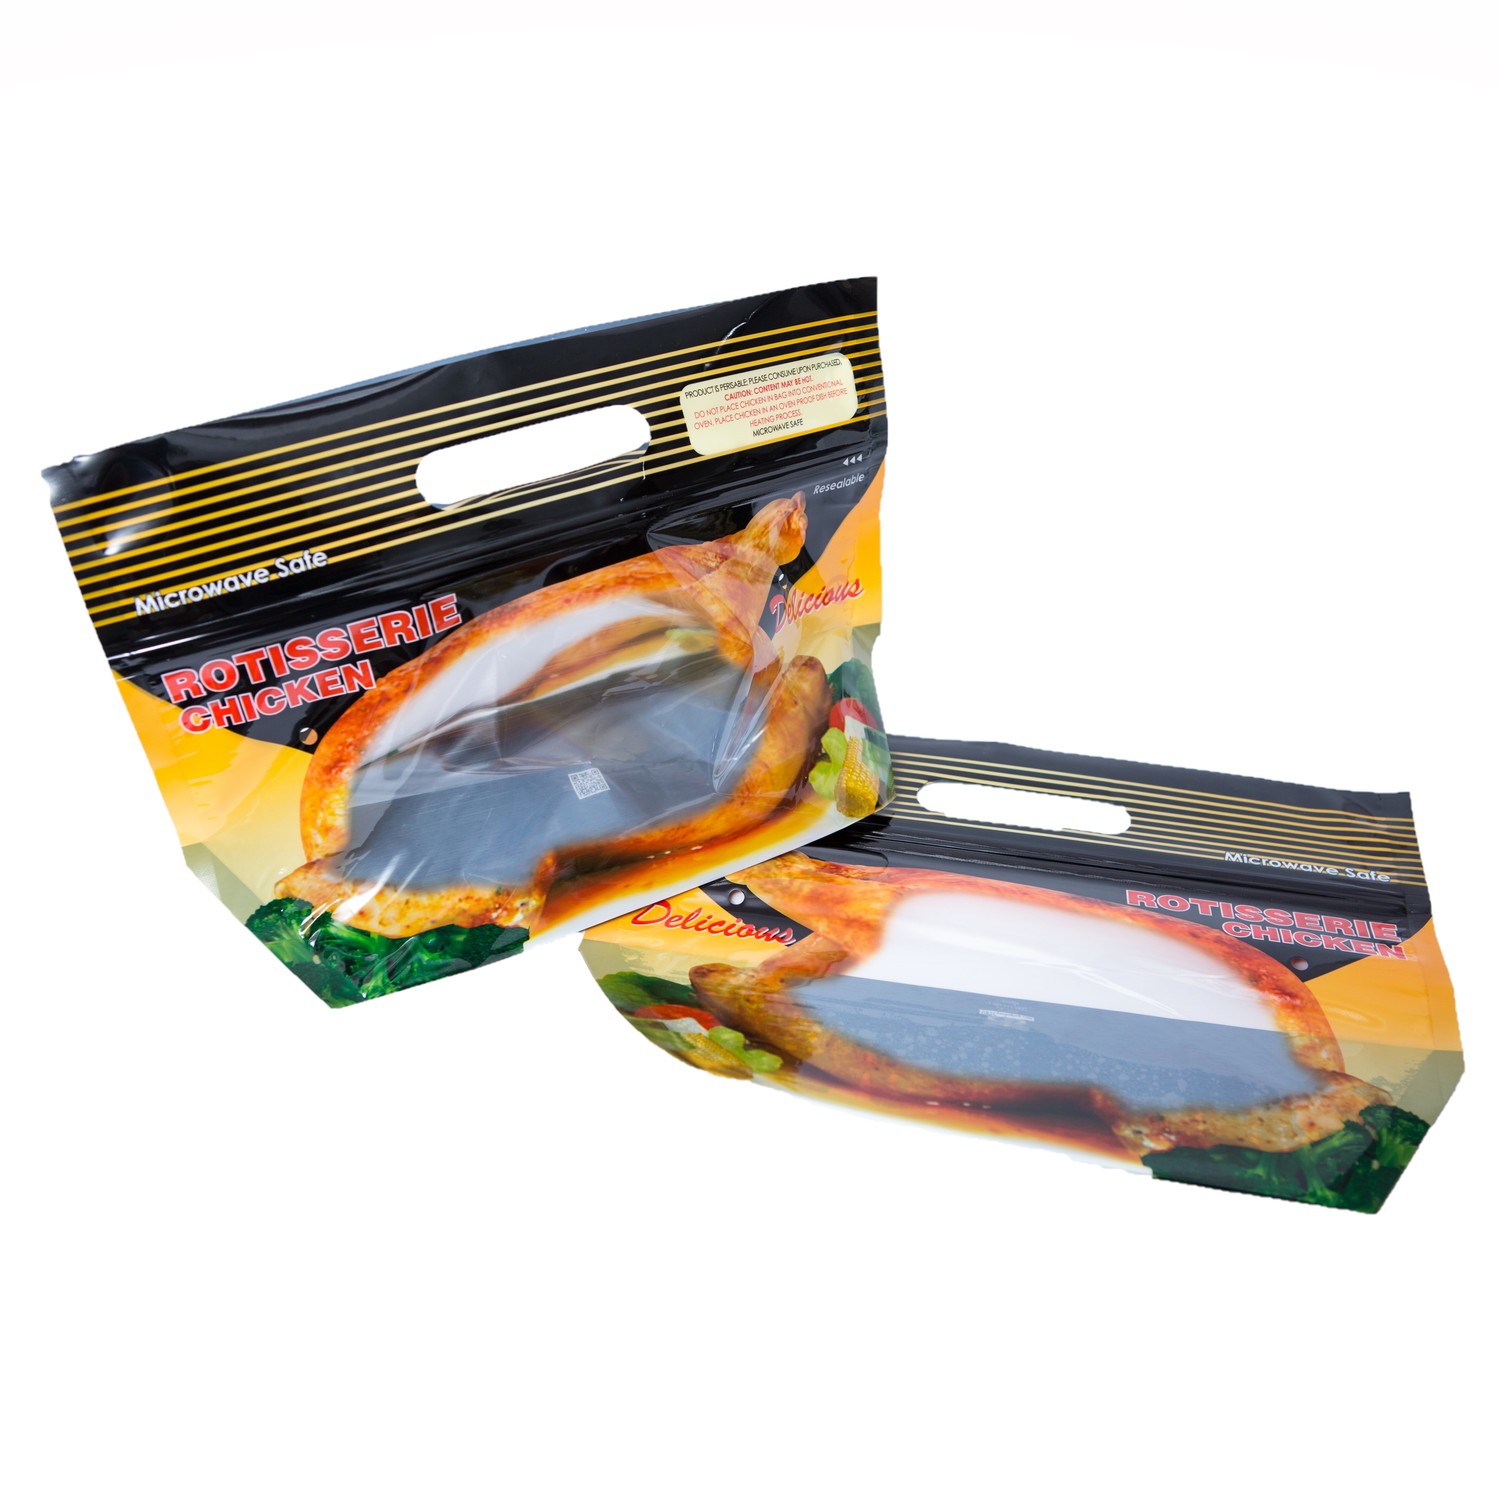 MICROWAVE 1 grilled chicken packaging